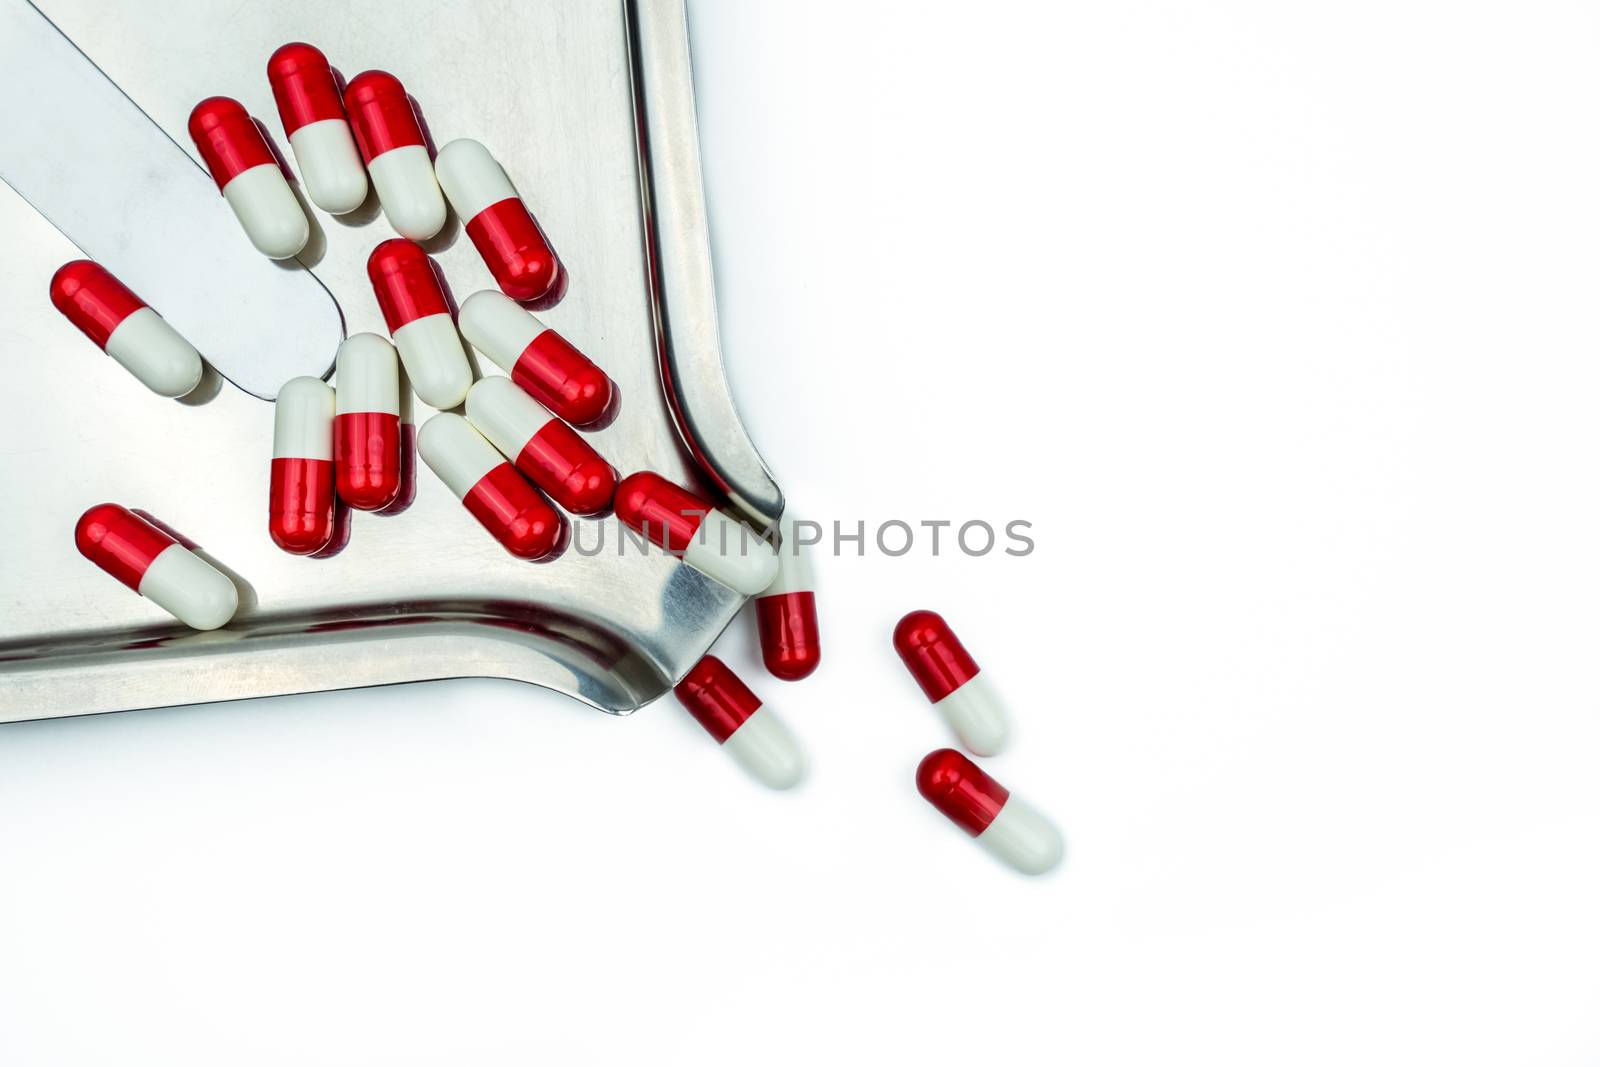 Top view of red, white antibiotic capsules pills on stainless steel drug tray. Drug resistance, antibiotic drug use with reasonable, health policy and health insurance concept. Pharmaceutical industry. Pharmacy background.